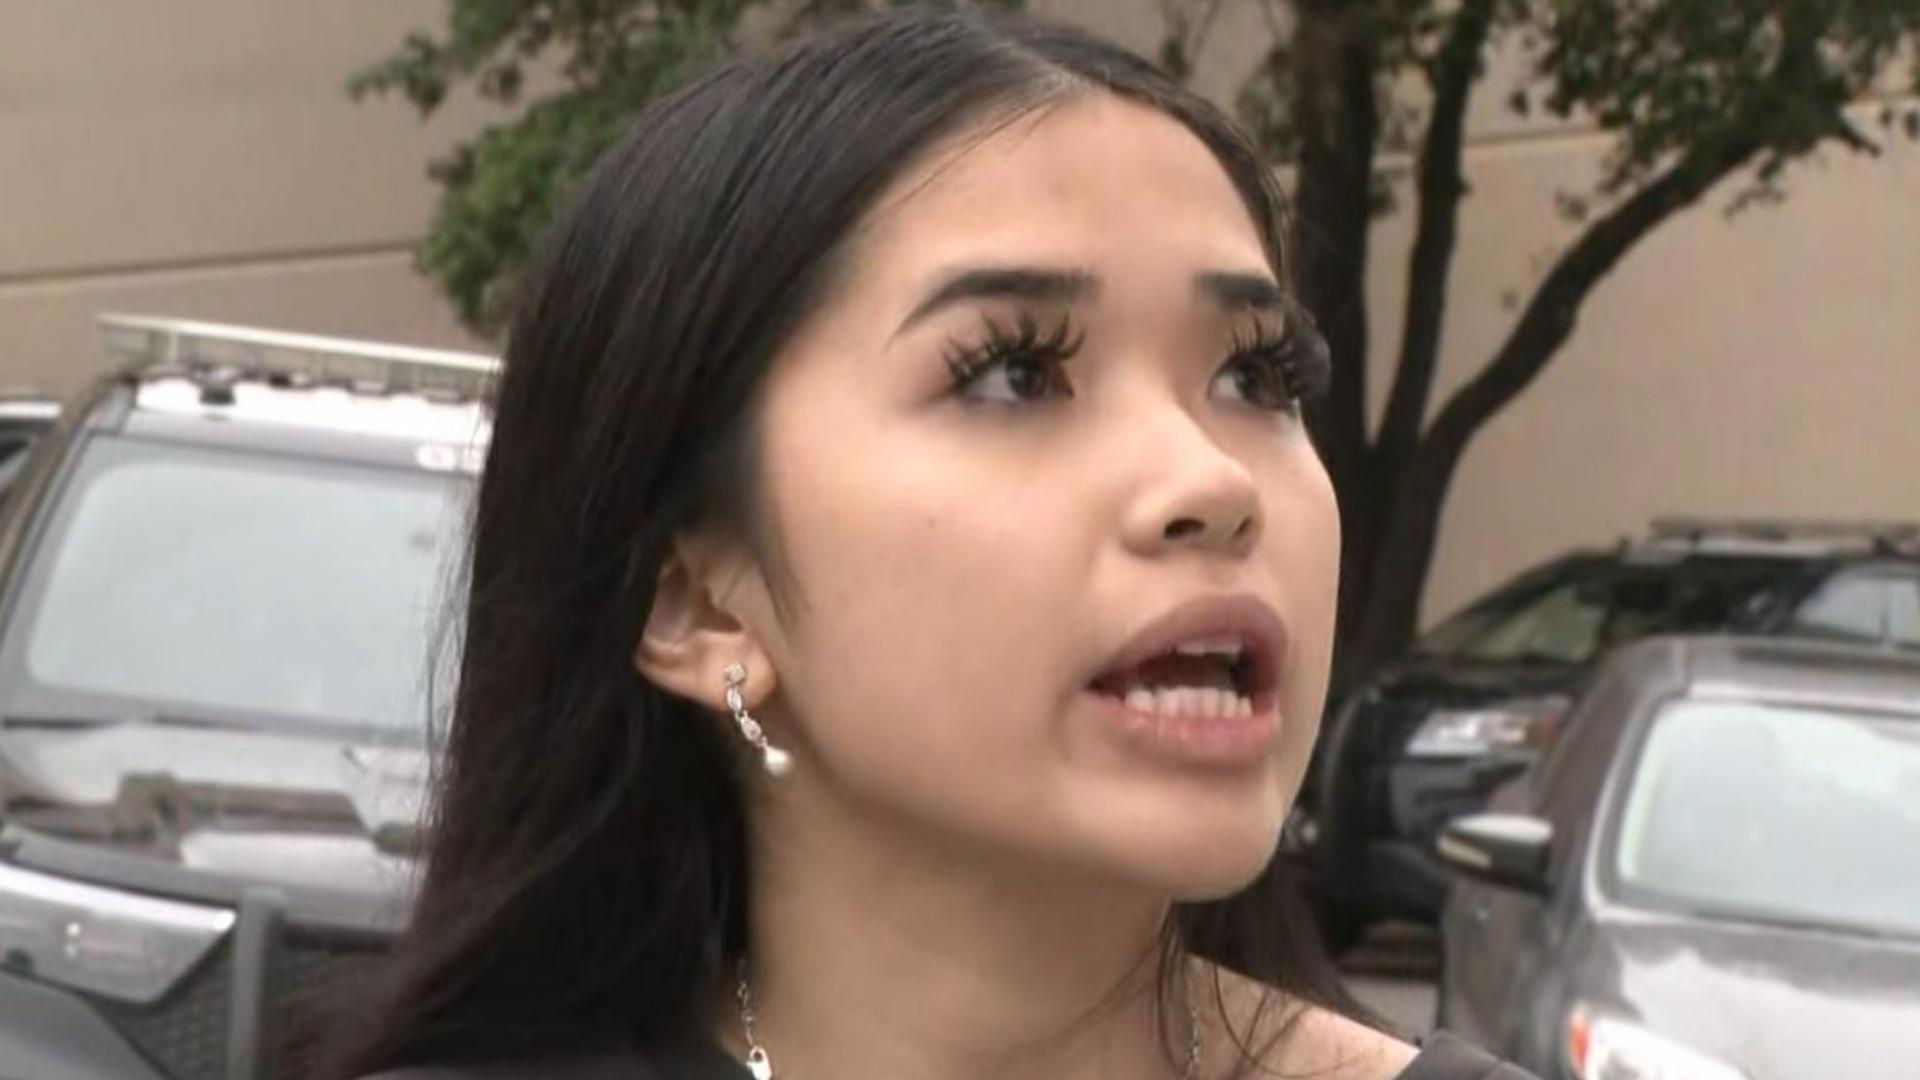 KVUE spoke with a University of Texas at Austin student who was arrested at the April 24 protest on campus.